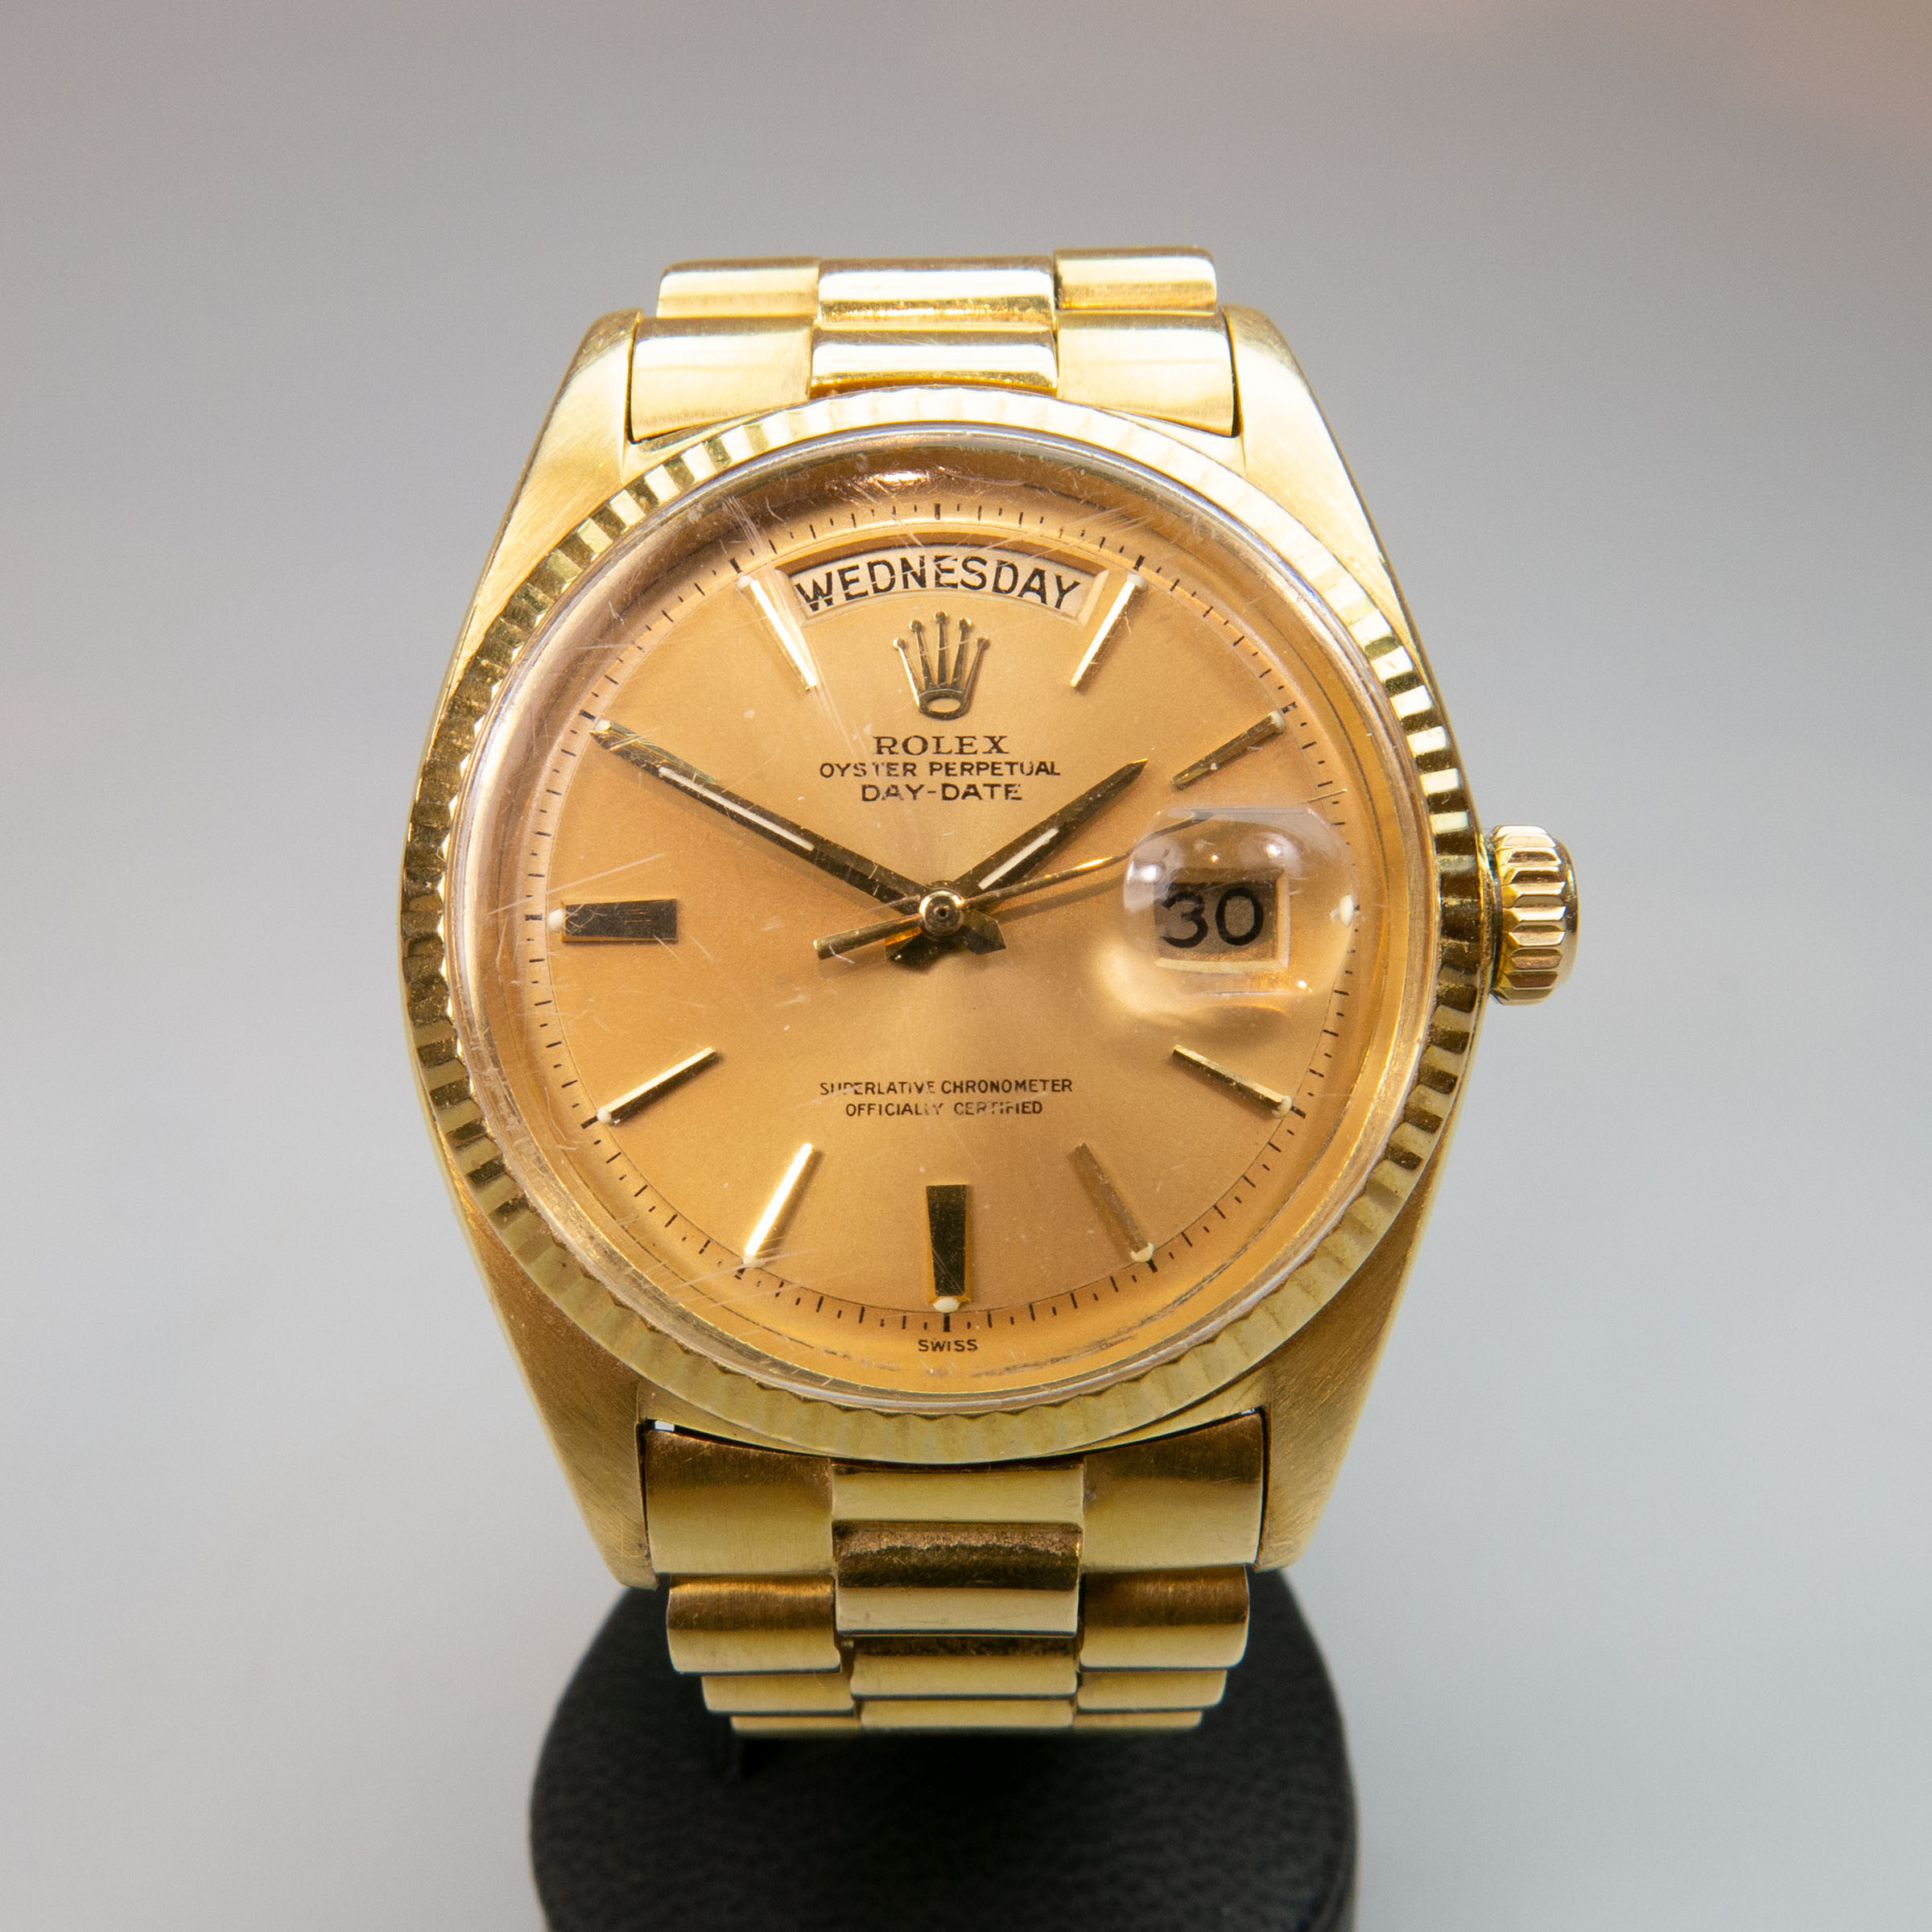 Rolex Oyster Perpetual Day-Date Wristwatch